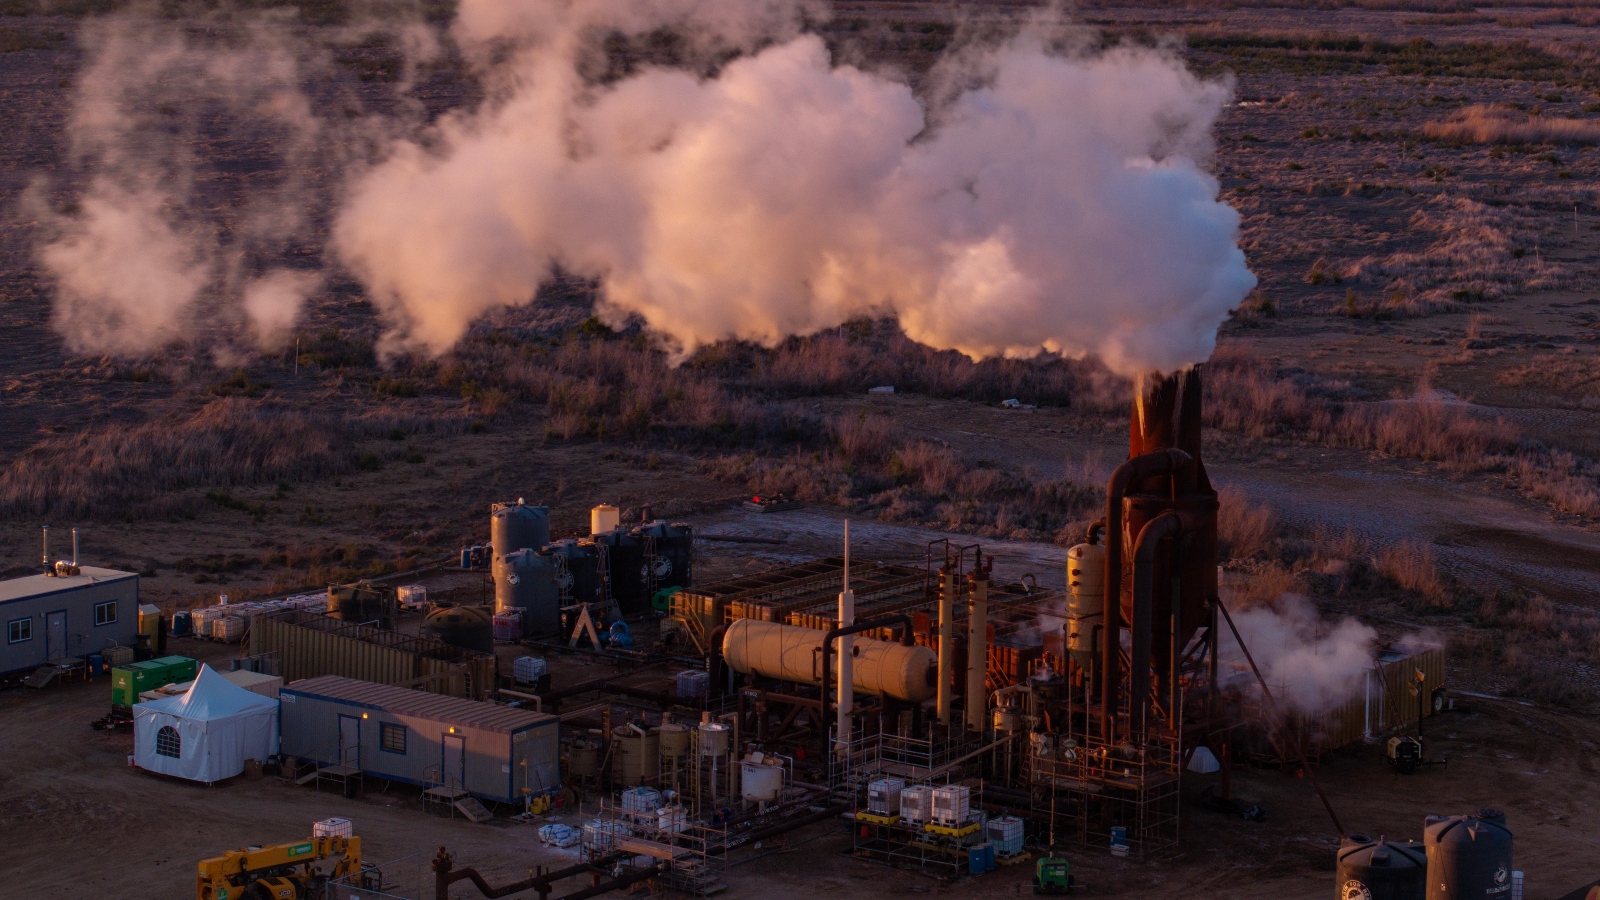 The US aims to ‘crack the code’ on scaling up geothermal energy production